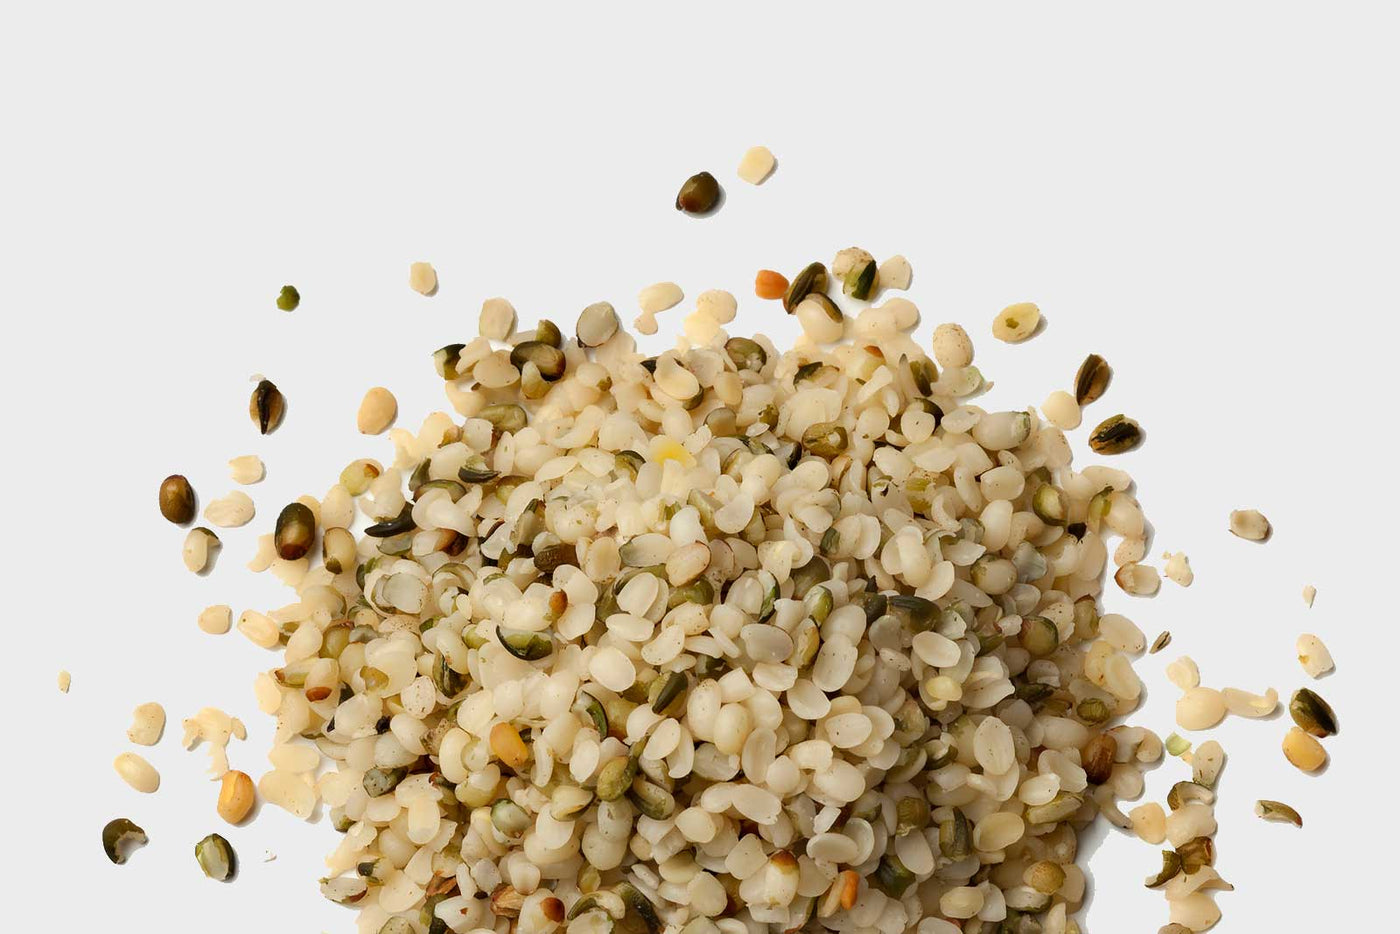 6 Benefits Of Hemp Seeds + How To Work Them Into Your Diet